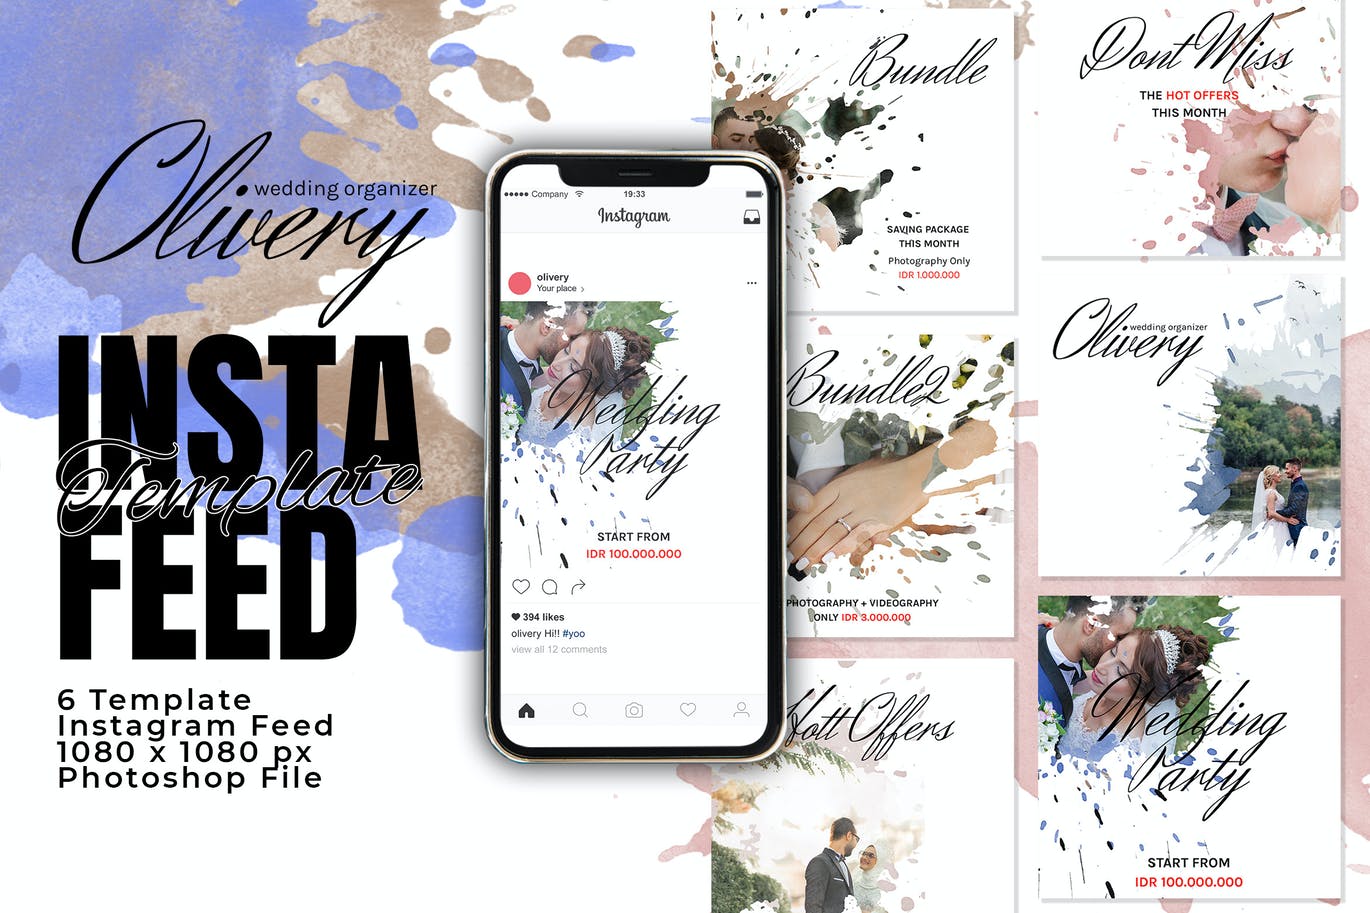 Clivery Instagram Feed Post Template